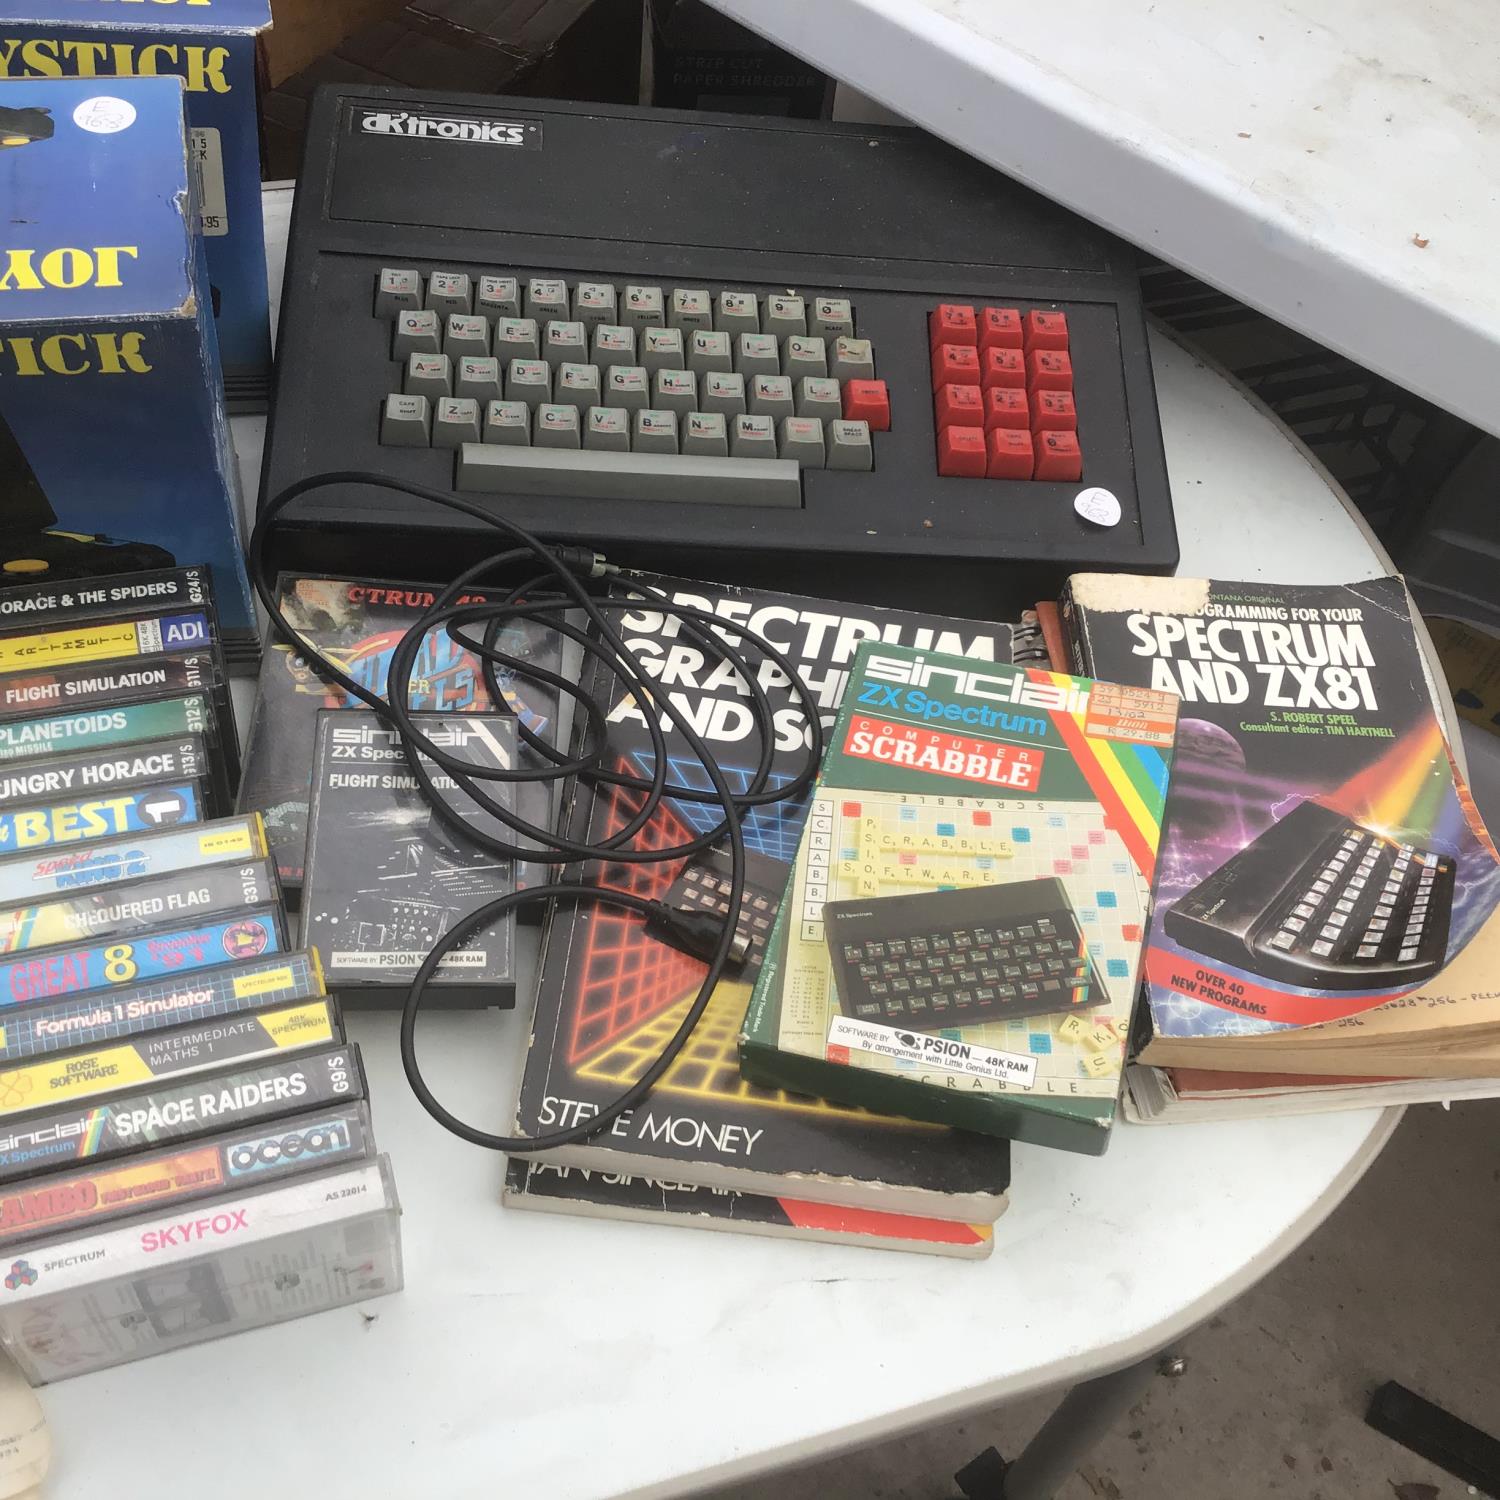 TWO SINCLAIR ZX SPECTRUM PERSONAL COMPUTERS, SPECTRUM JOYSTICK INTERFACE, SANYO DATA RECORDER, - Image 5 of 5